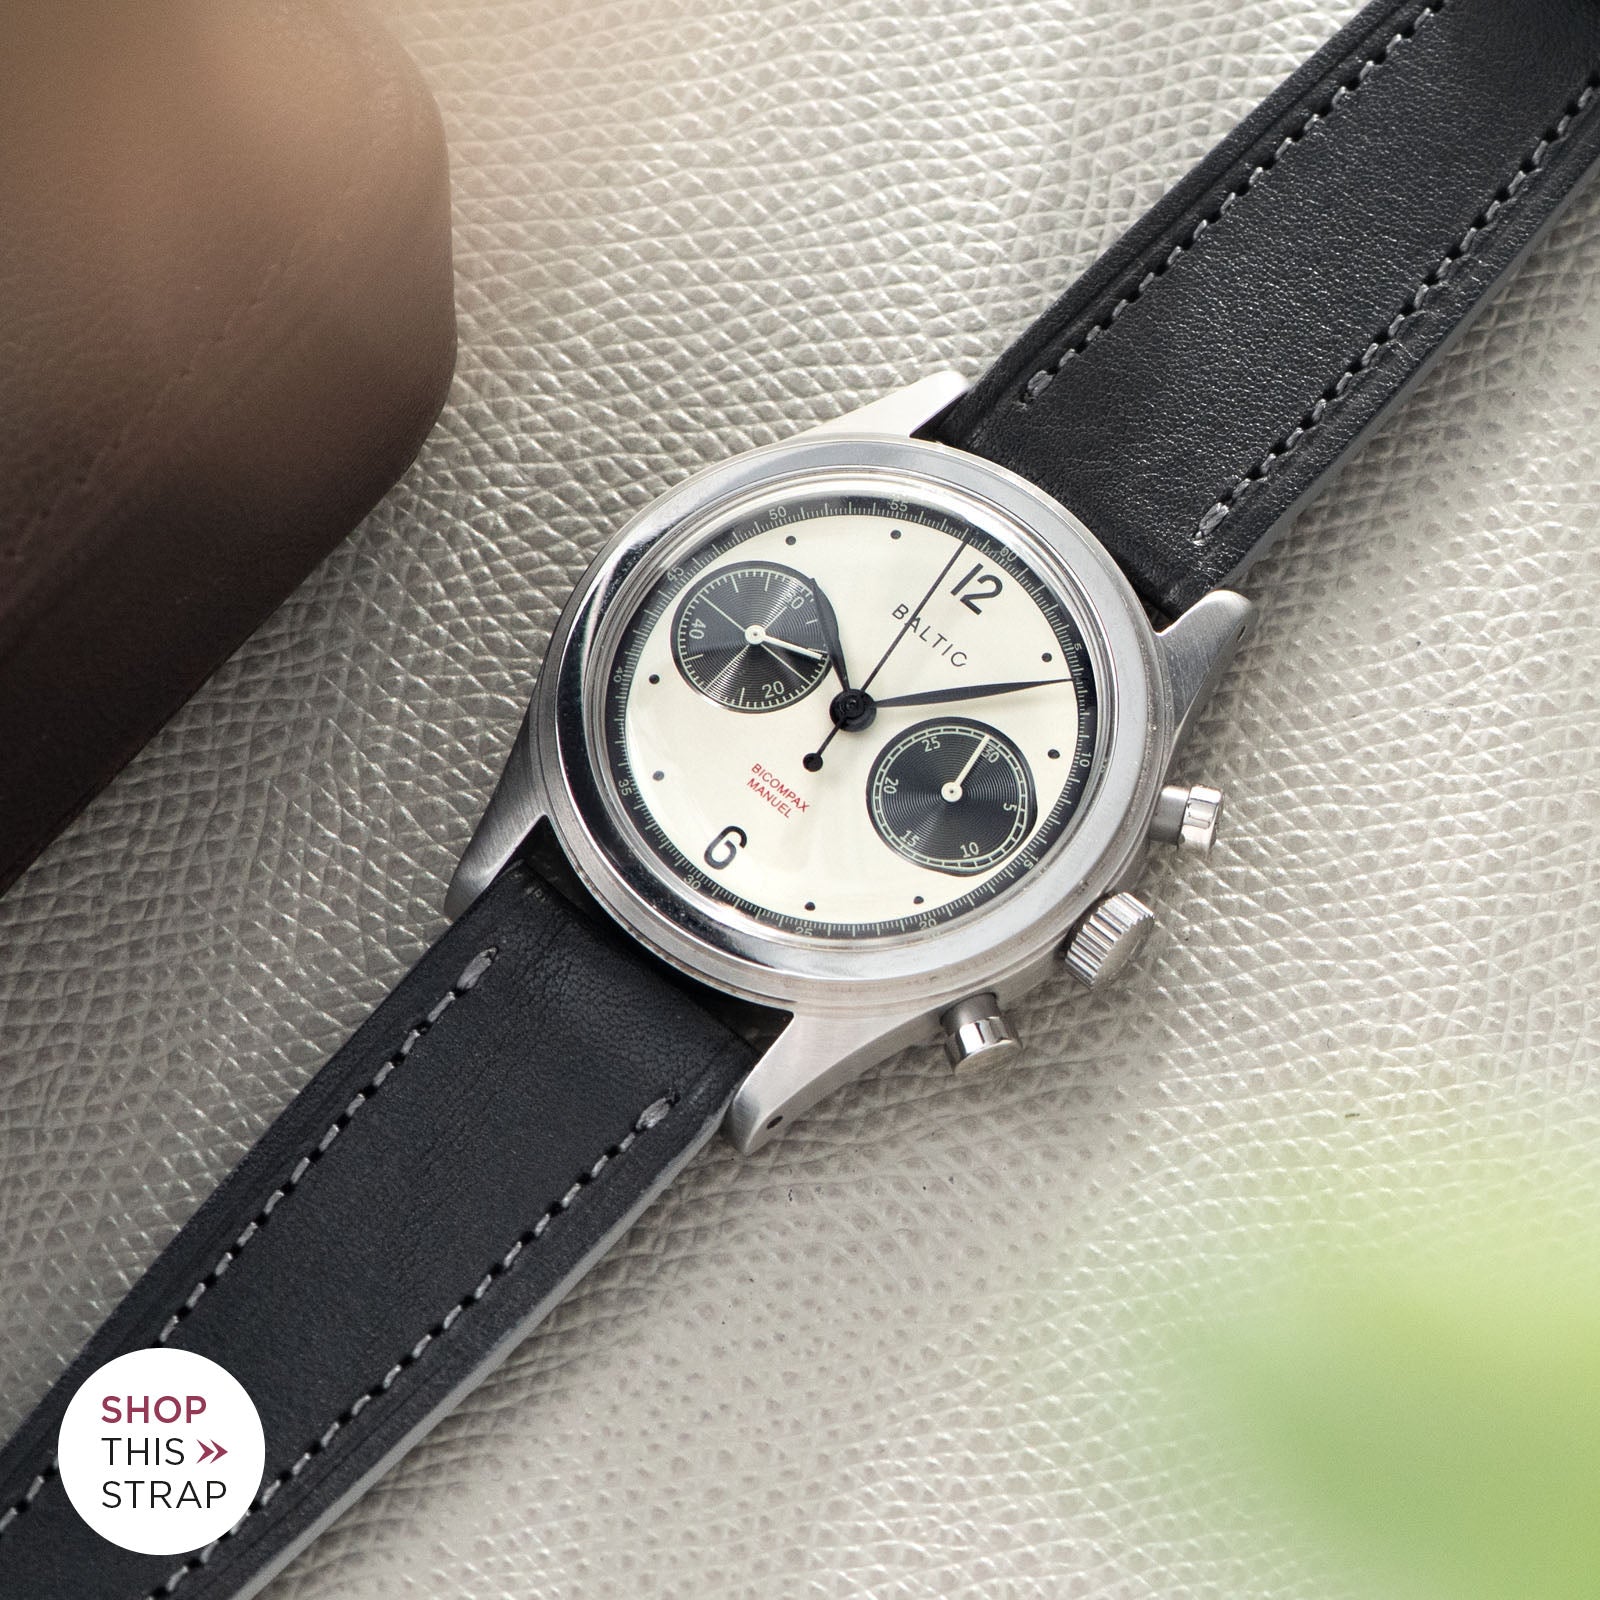 Bulang and Sons_Strap Guide_The Baltic-Chronograph-Panda-Limited-Edition_Café Noir Leather Watch Strap_1